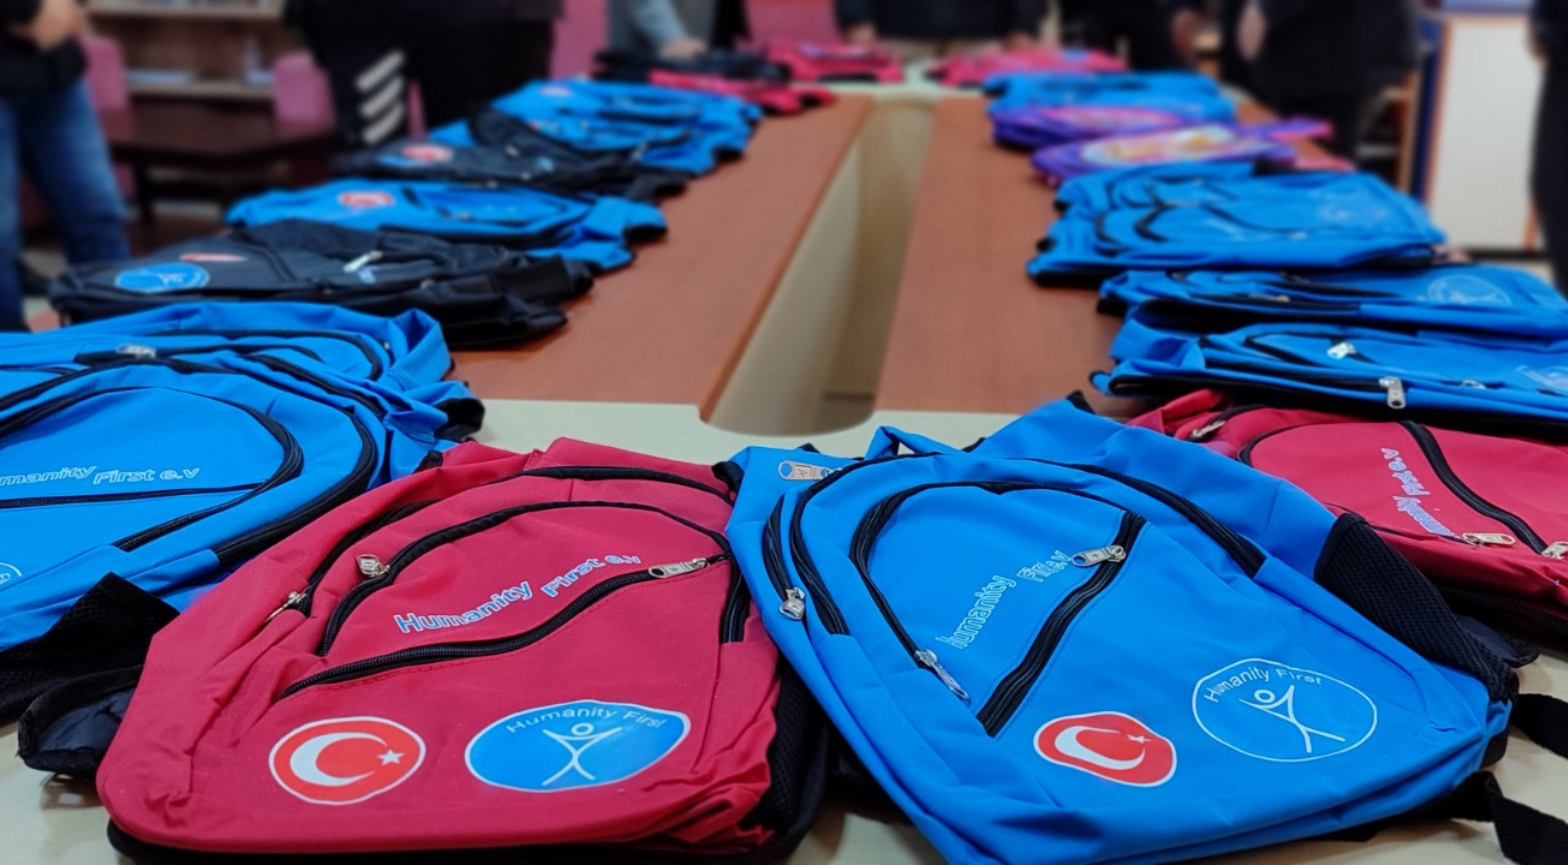 Dozens of brightly colored blue and red backpacks bearing the logos of Humanity First and the Turkish Red Crescent are displayed on a table.